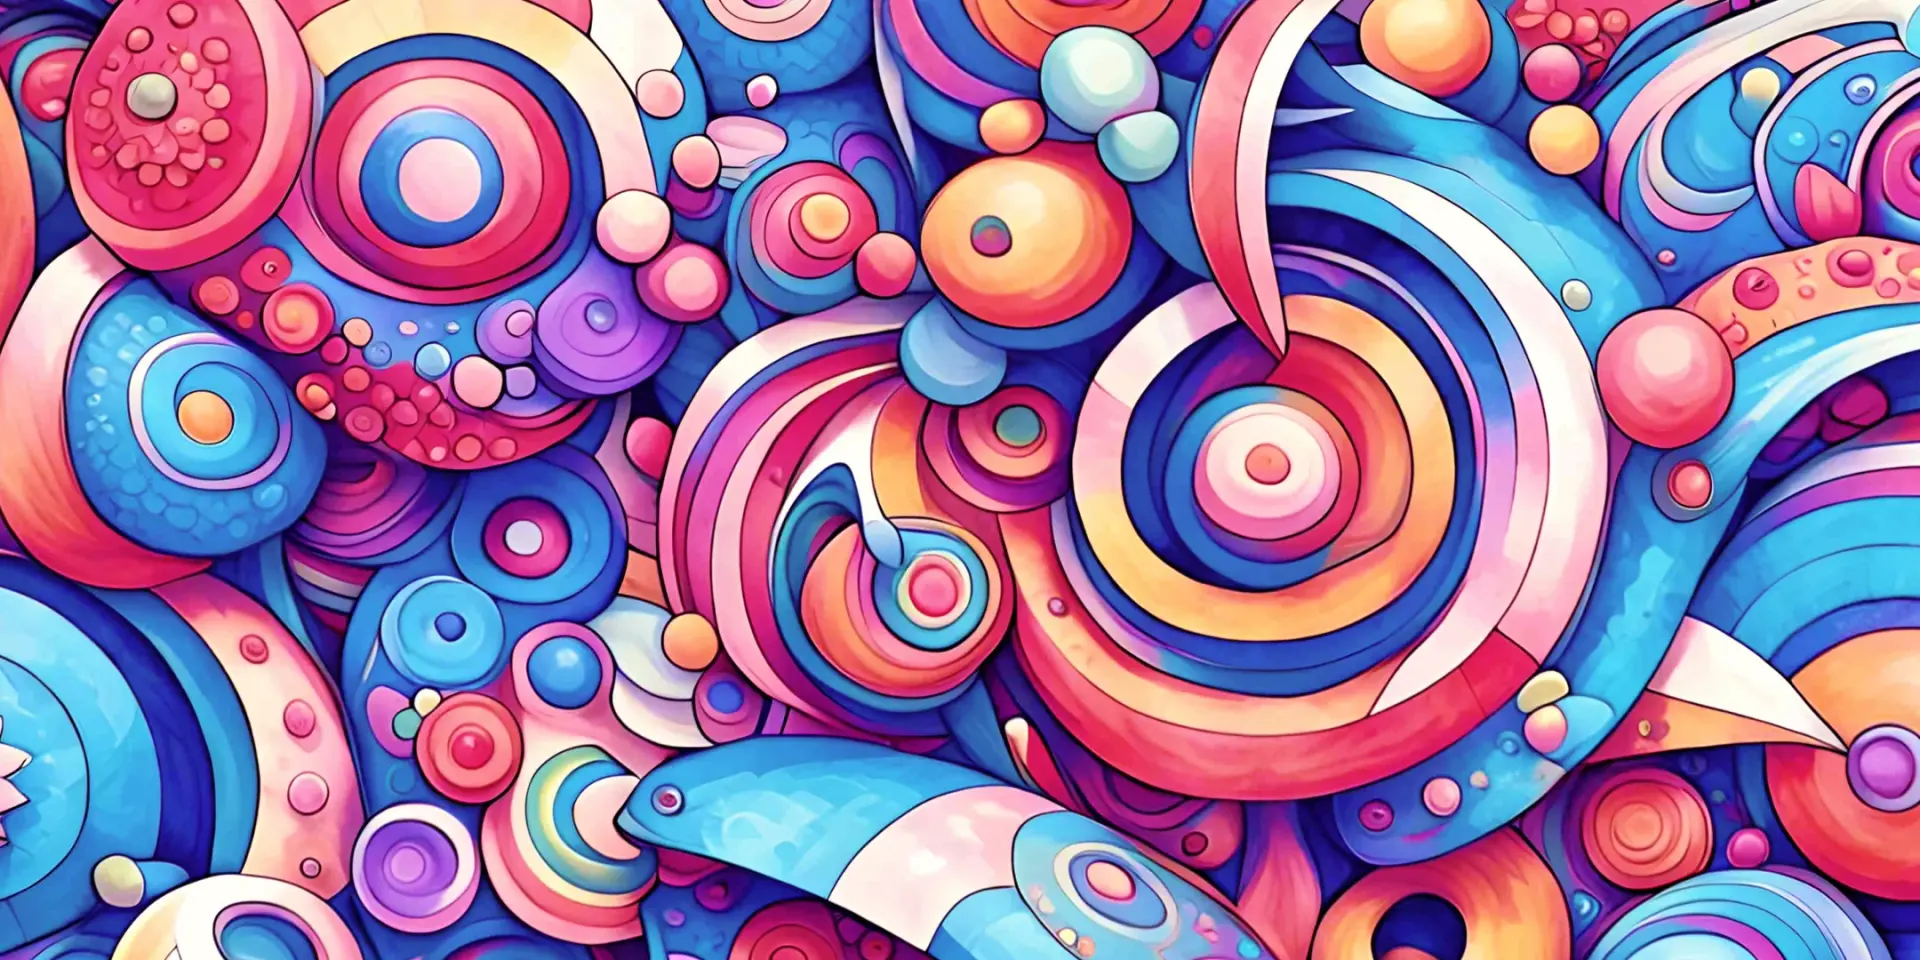 A beautiful abstract maximalist style graphic